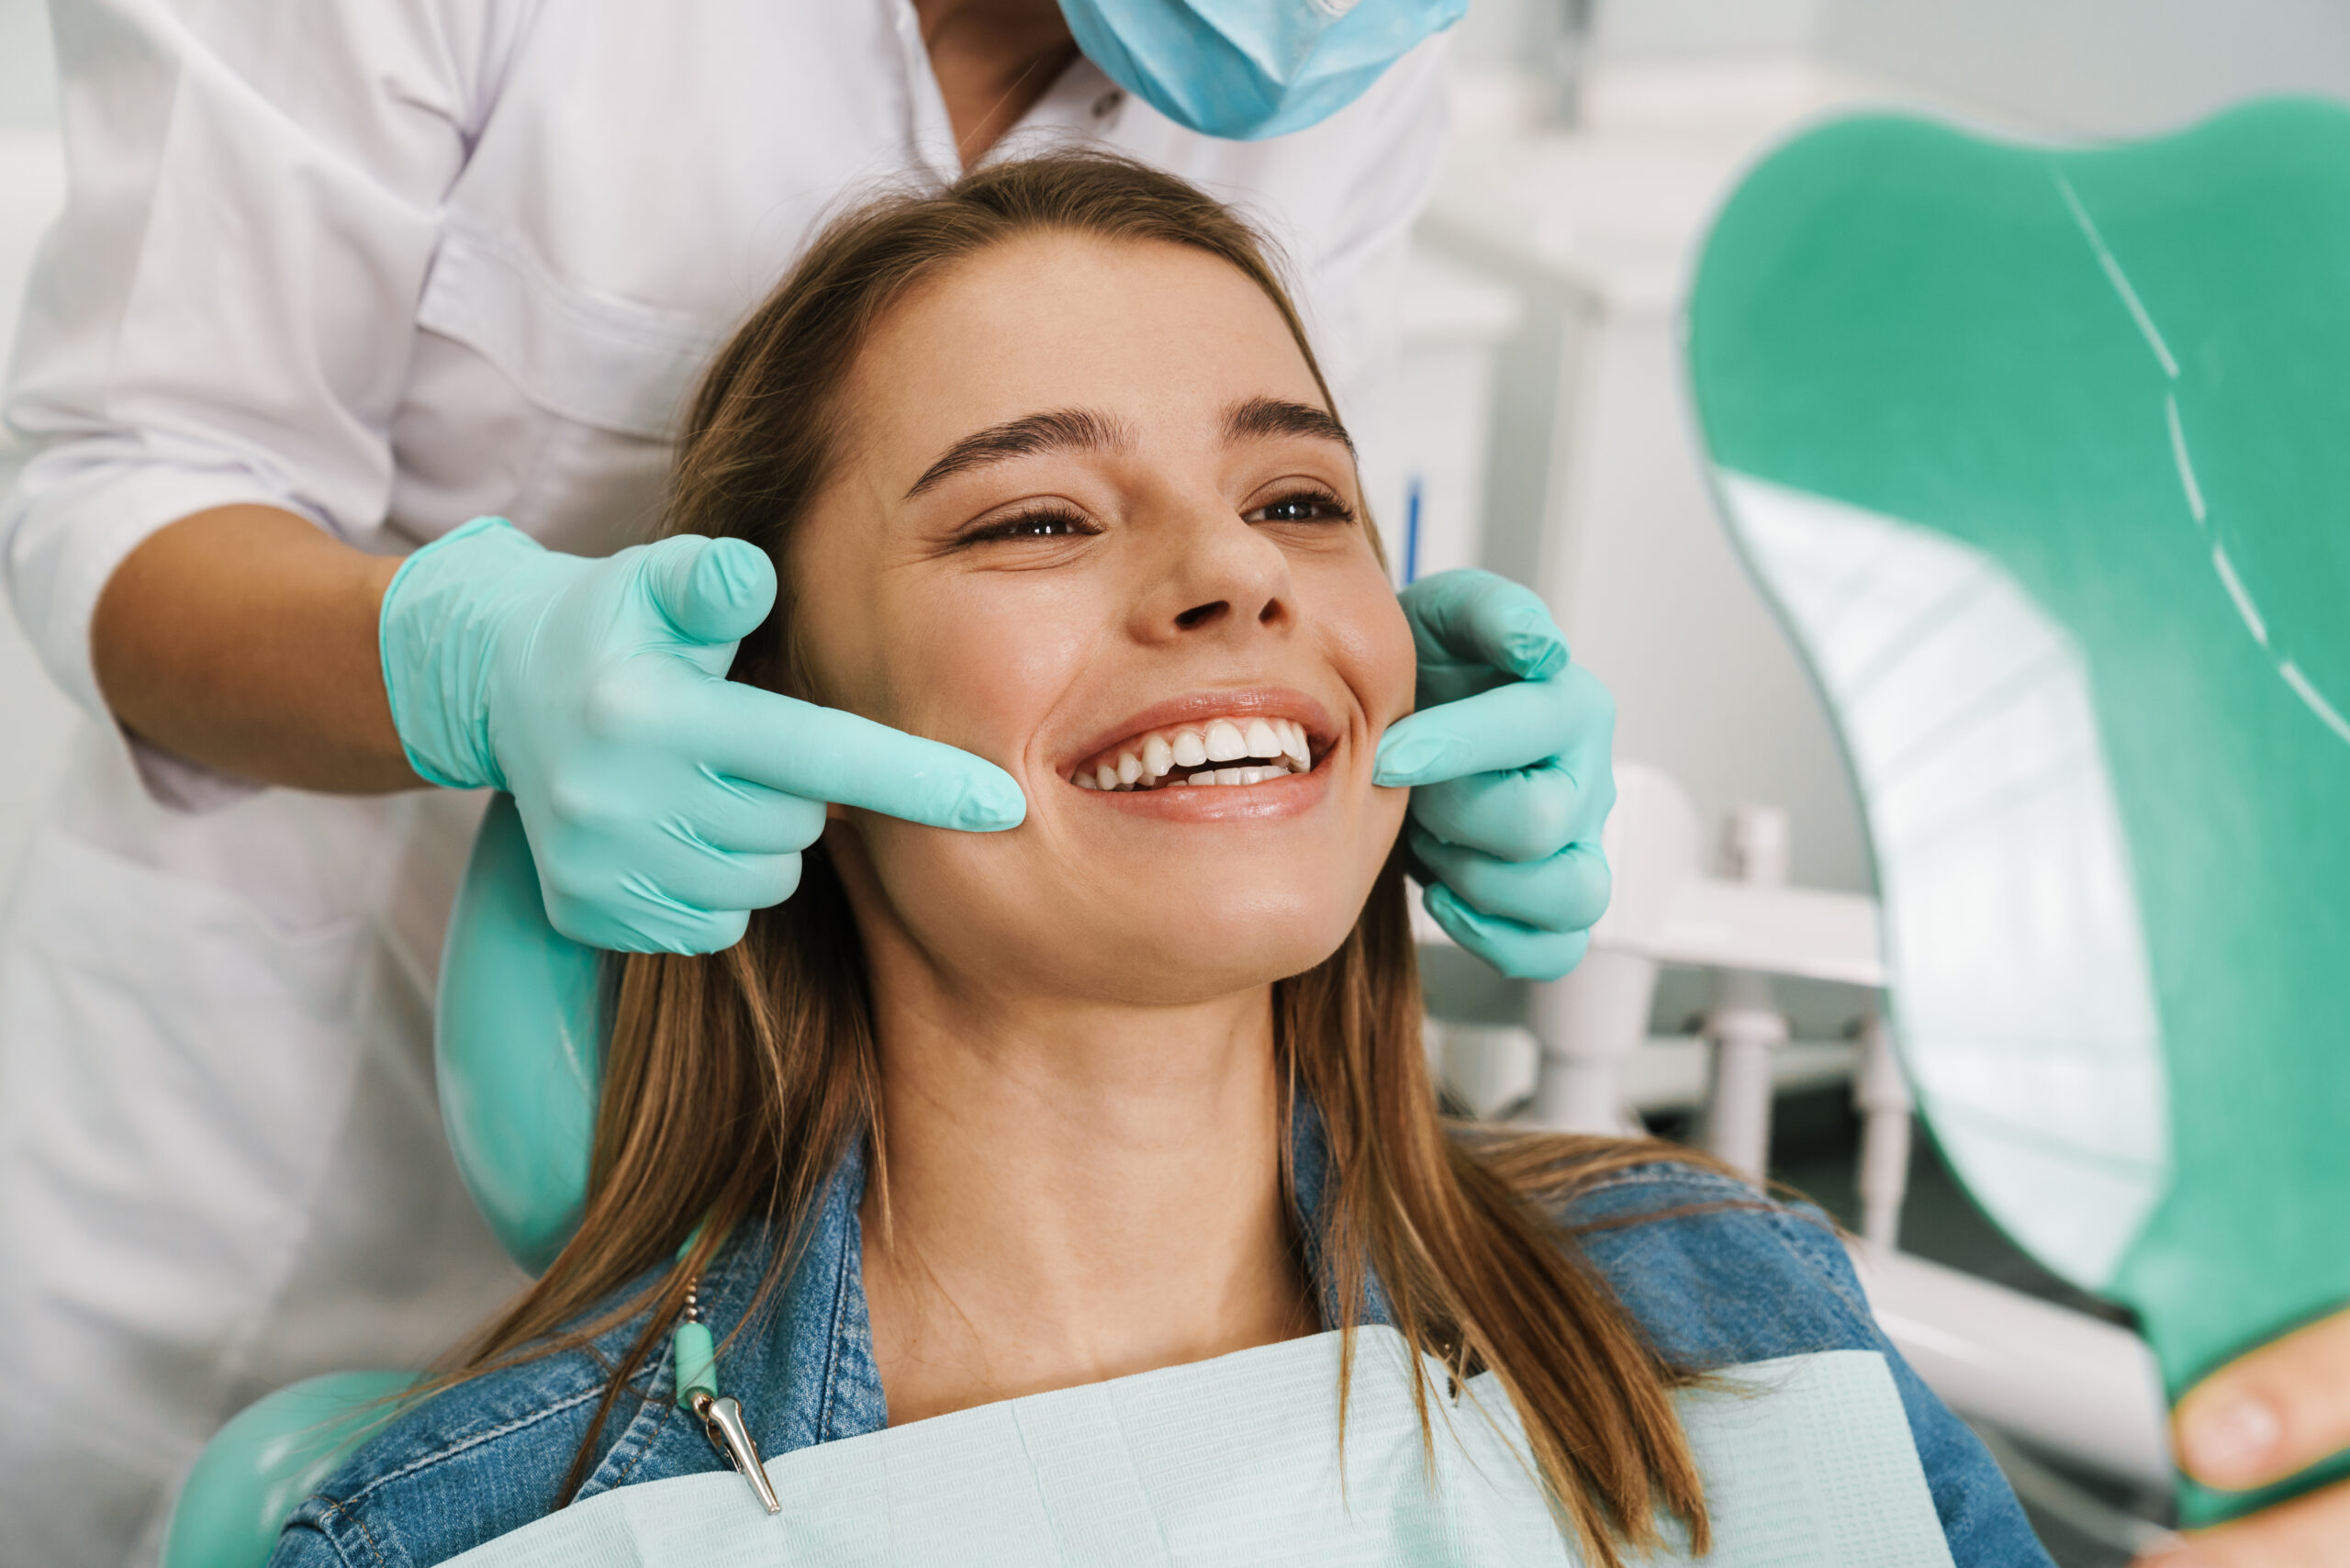 European young woman smiling while looking at mirror in dental c